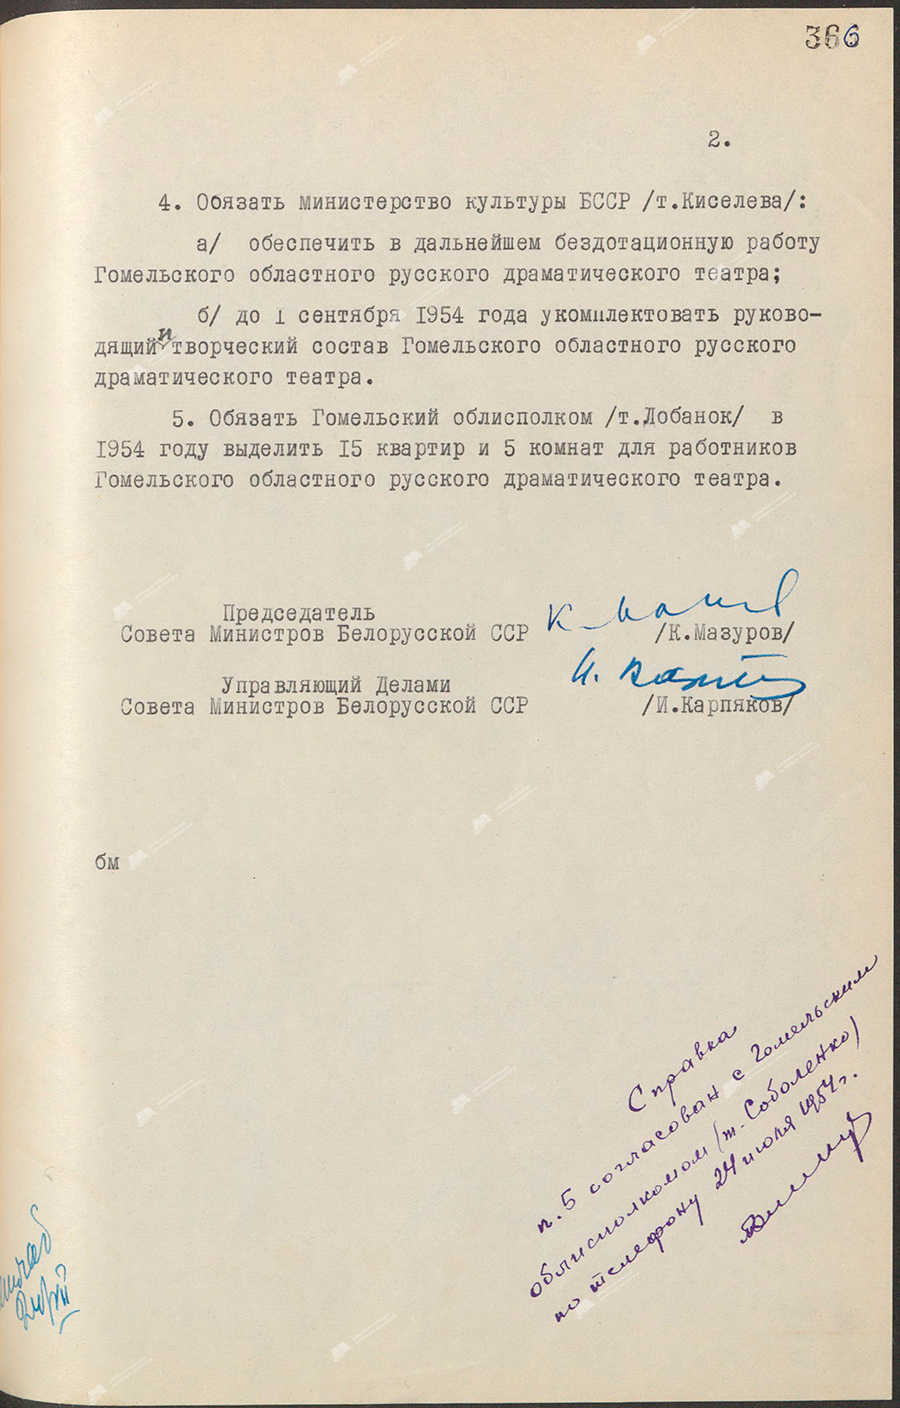 Resolution No. 697 of the Council of Ministers of the Byelorussian SSR «On the organization of the Gomel Regional Russian Drama Theater»-с. 1